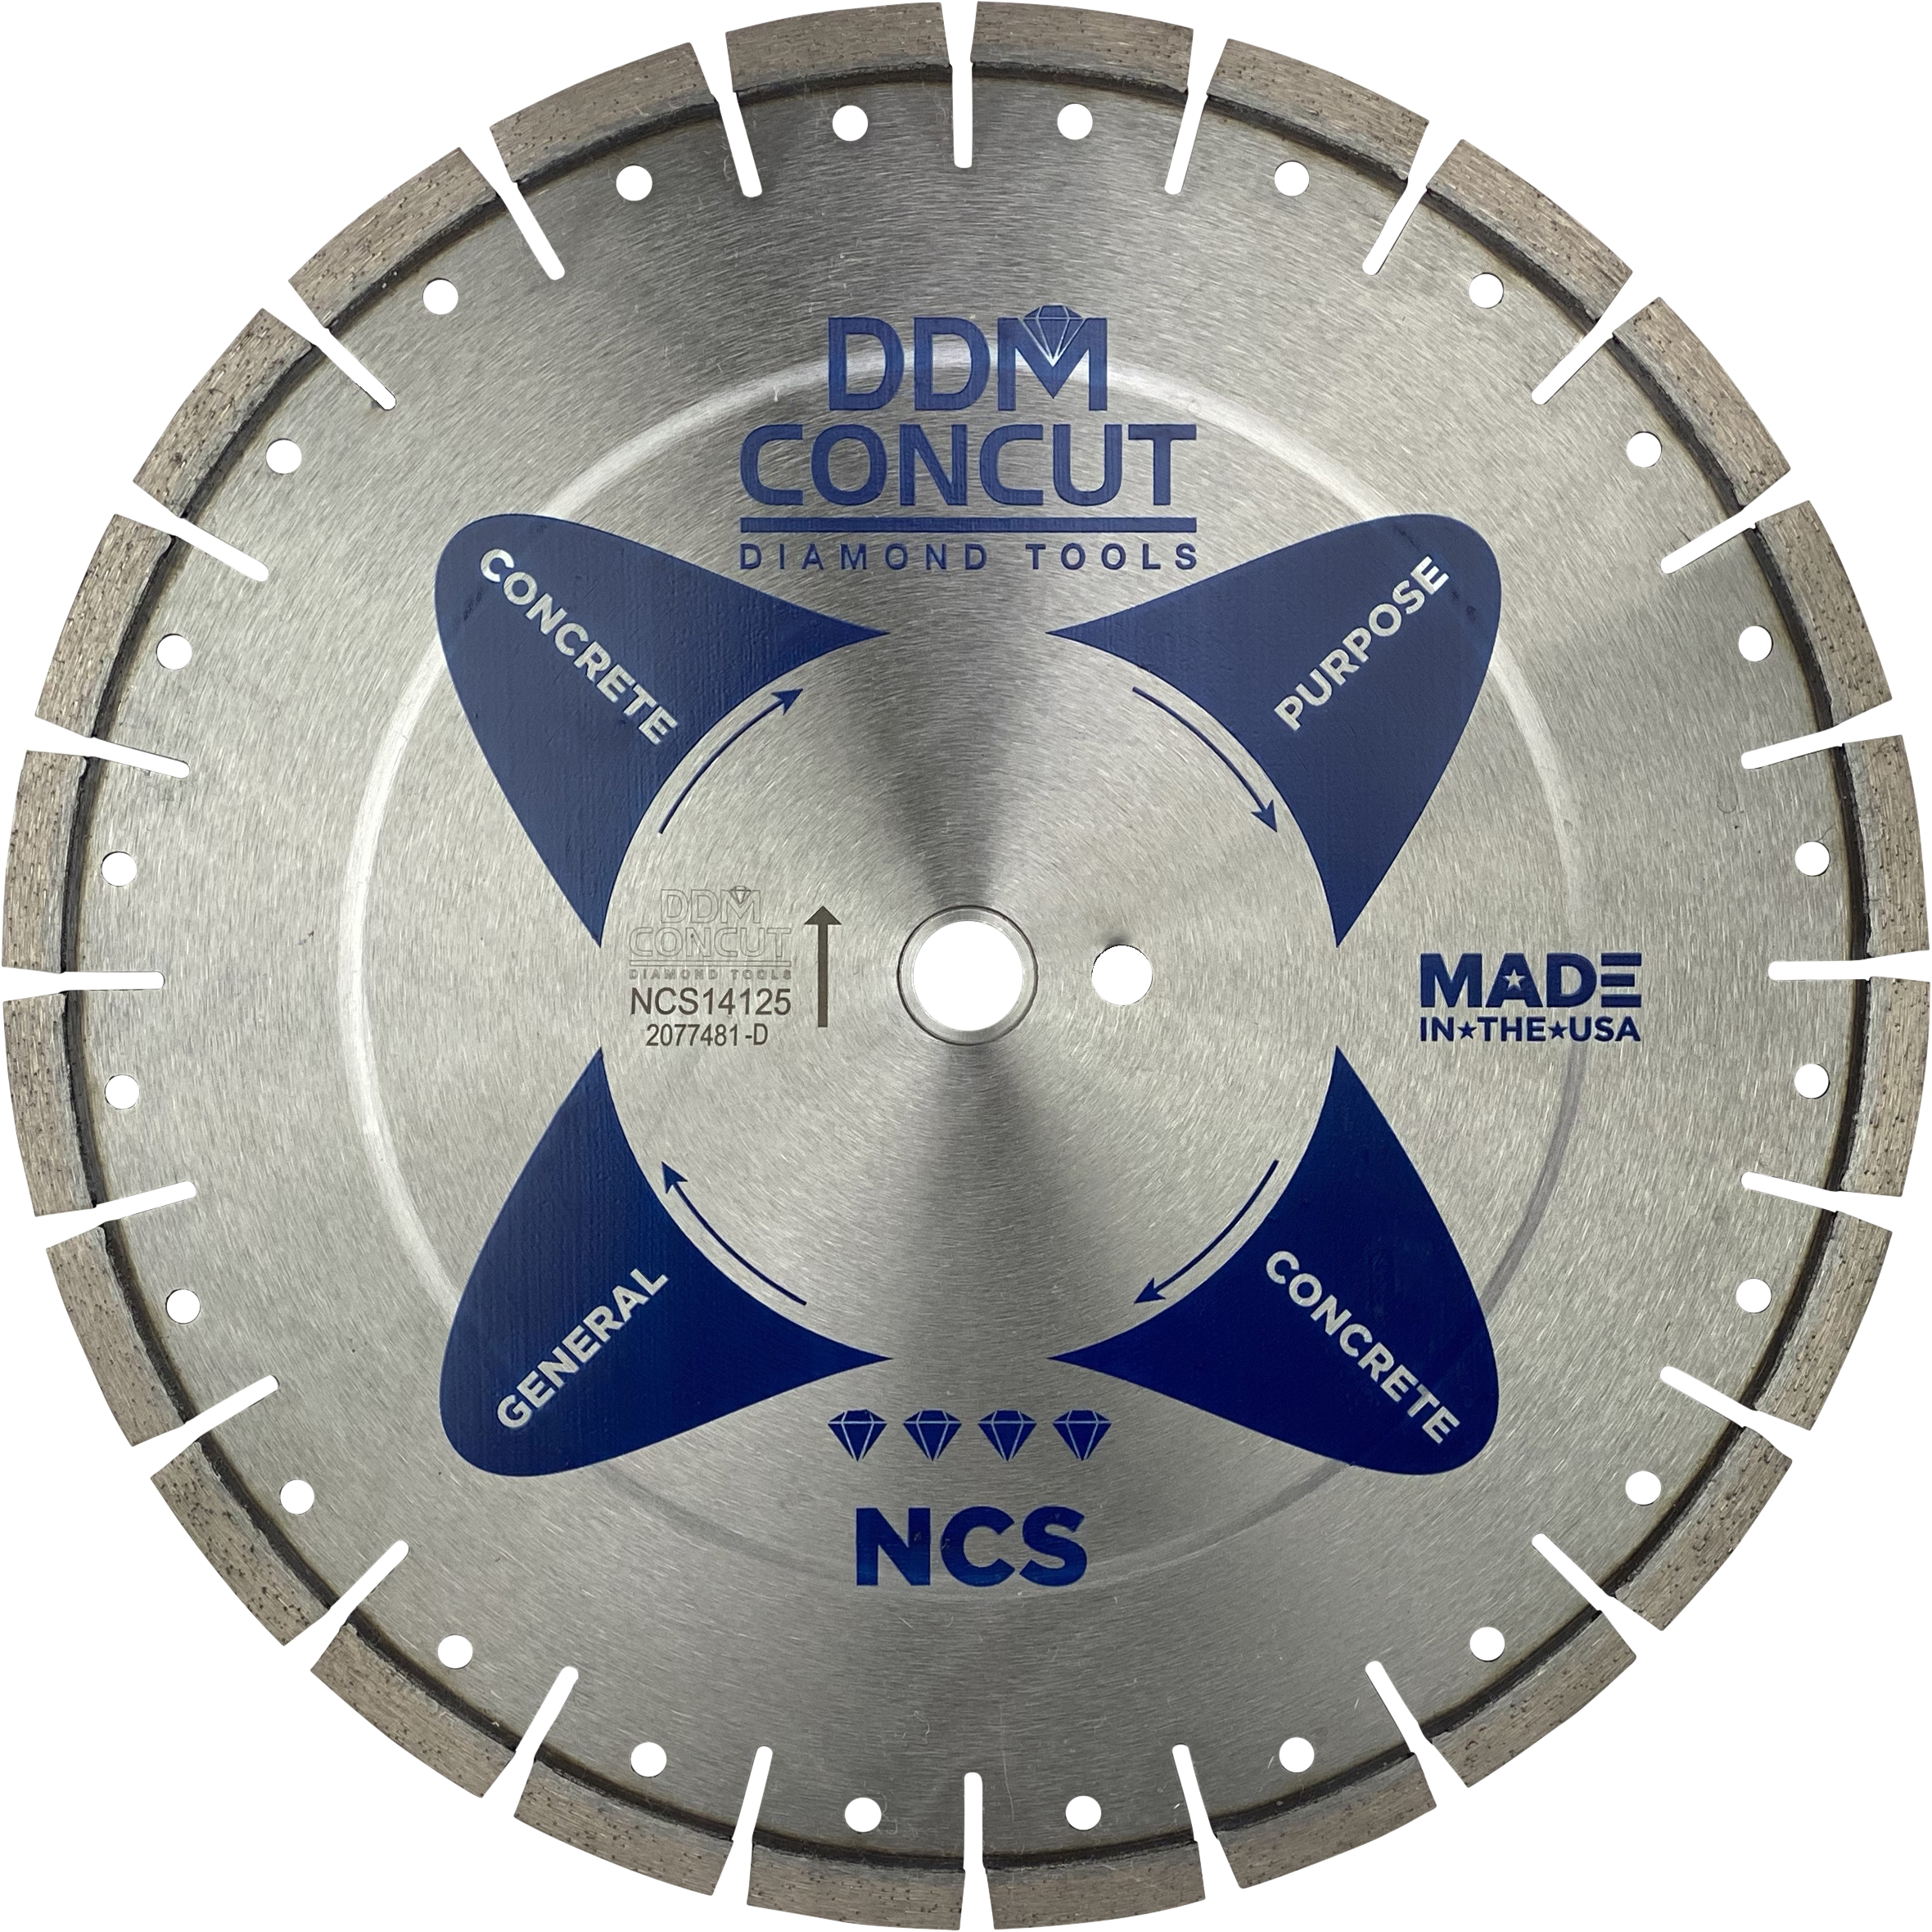 DDM NCS Dry Cut General Purpose Diamond Blade - Utility and Pocket Knives